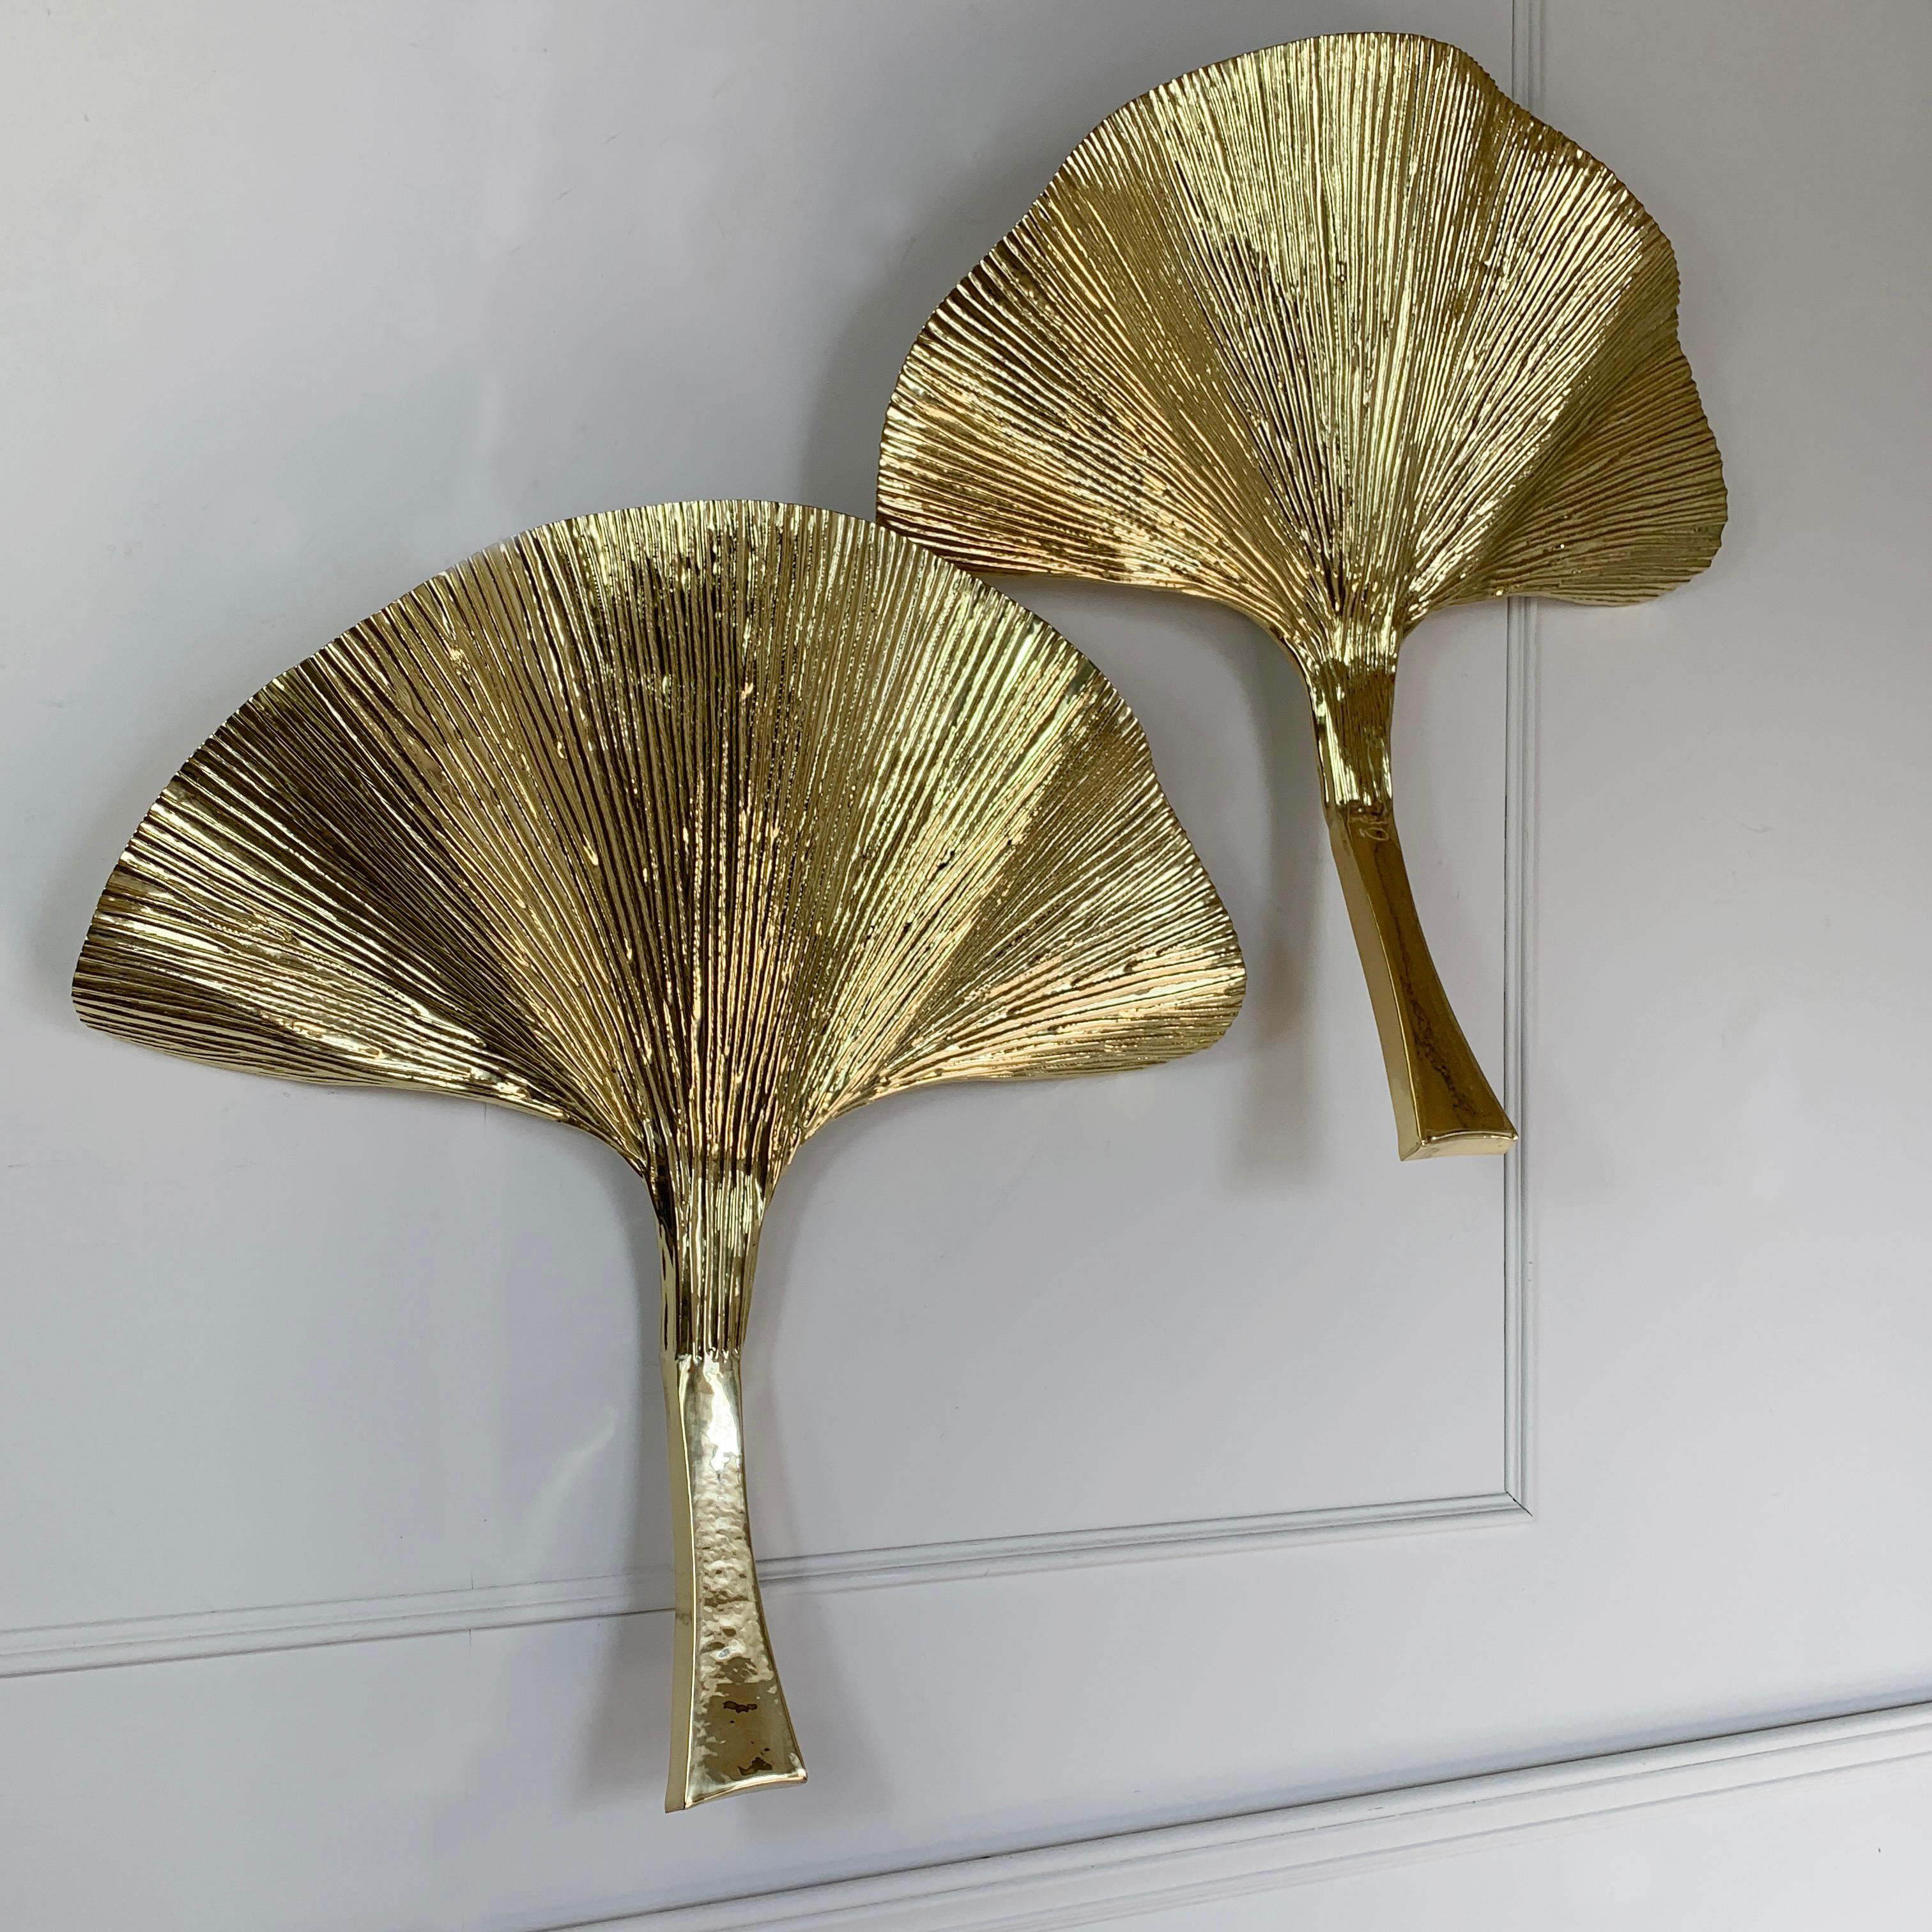 Large pair of brass ginkgo wall lamps attributed to Carlo Giorgi for Bottega Gadda
Dating to the 2nd half of the 20th century, Italy
Huge bright gilt ginkgo leaves with stems, both lights are slightly different in shape, full with linear leaf